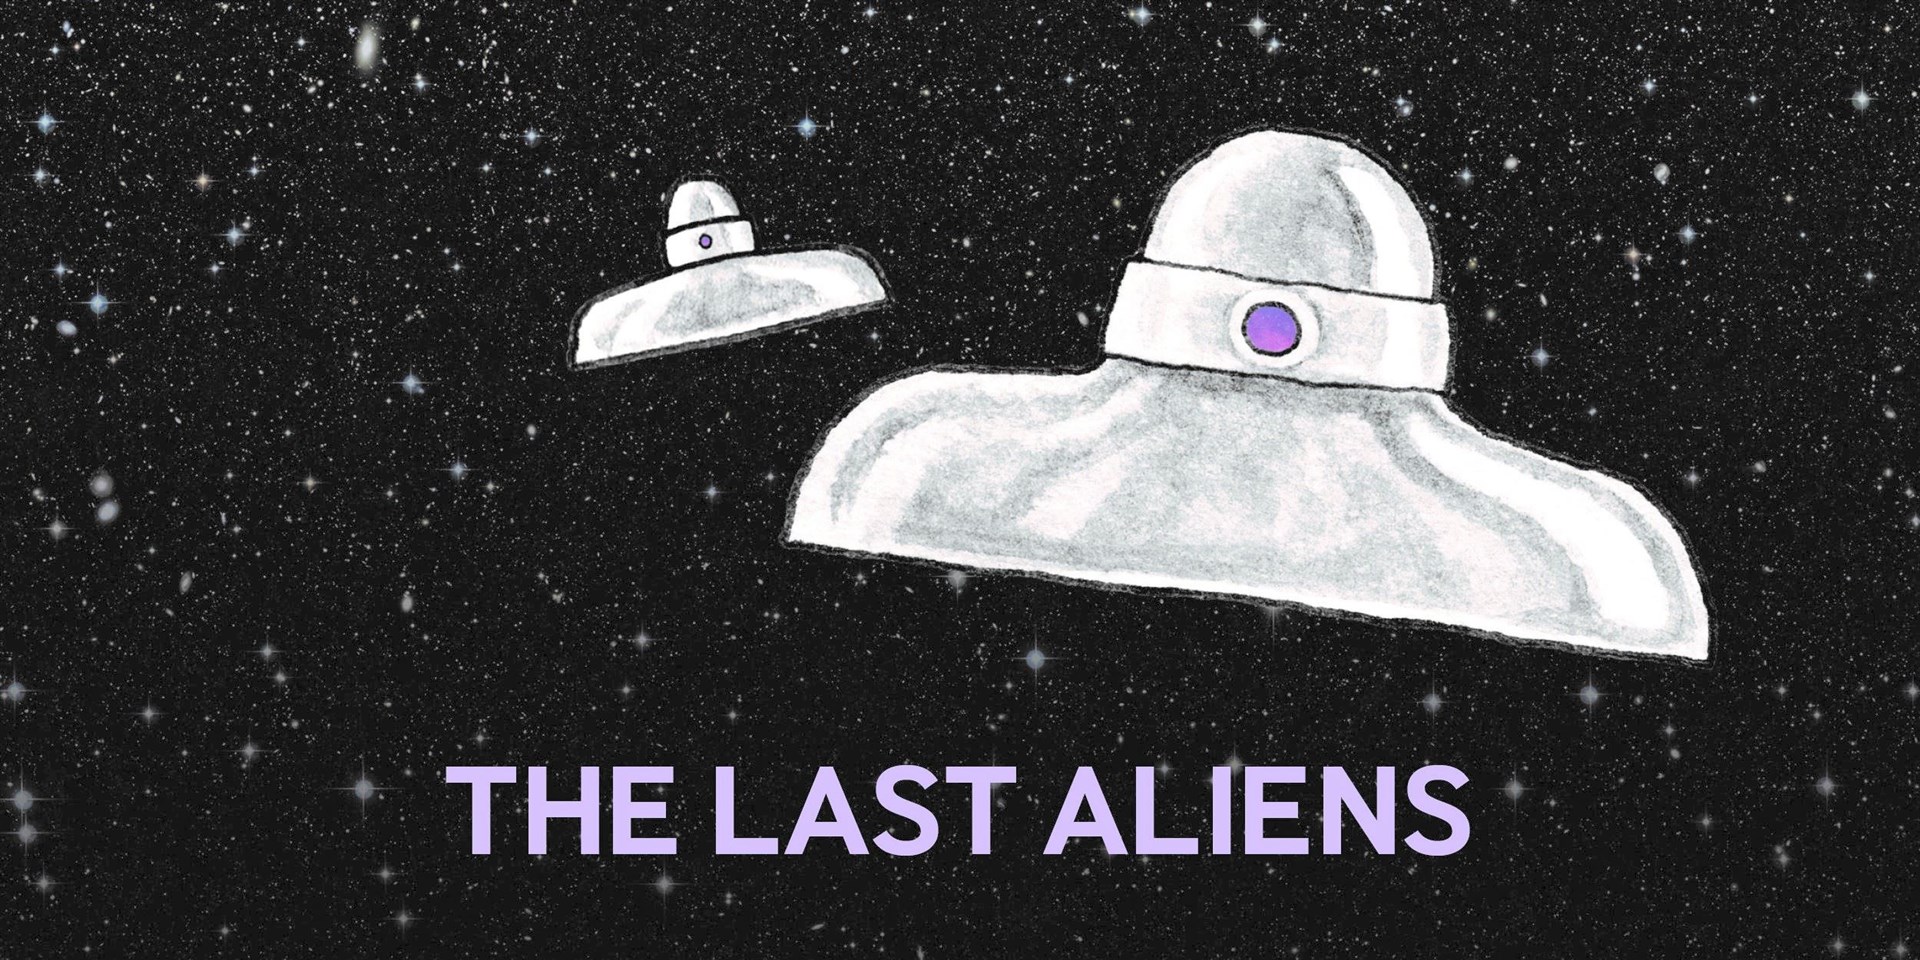 The Last Aliens will be visiting five Moray schools between March and the end of May.